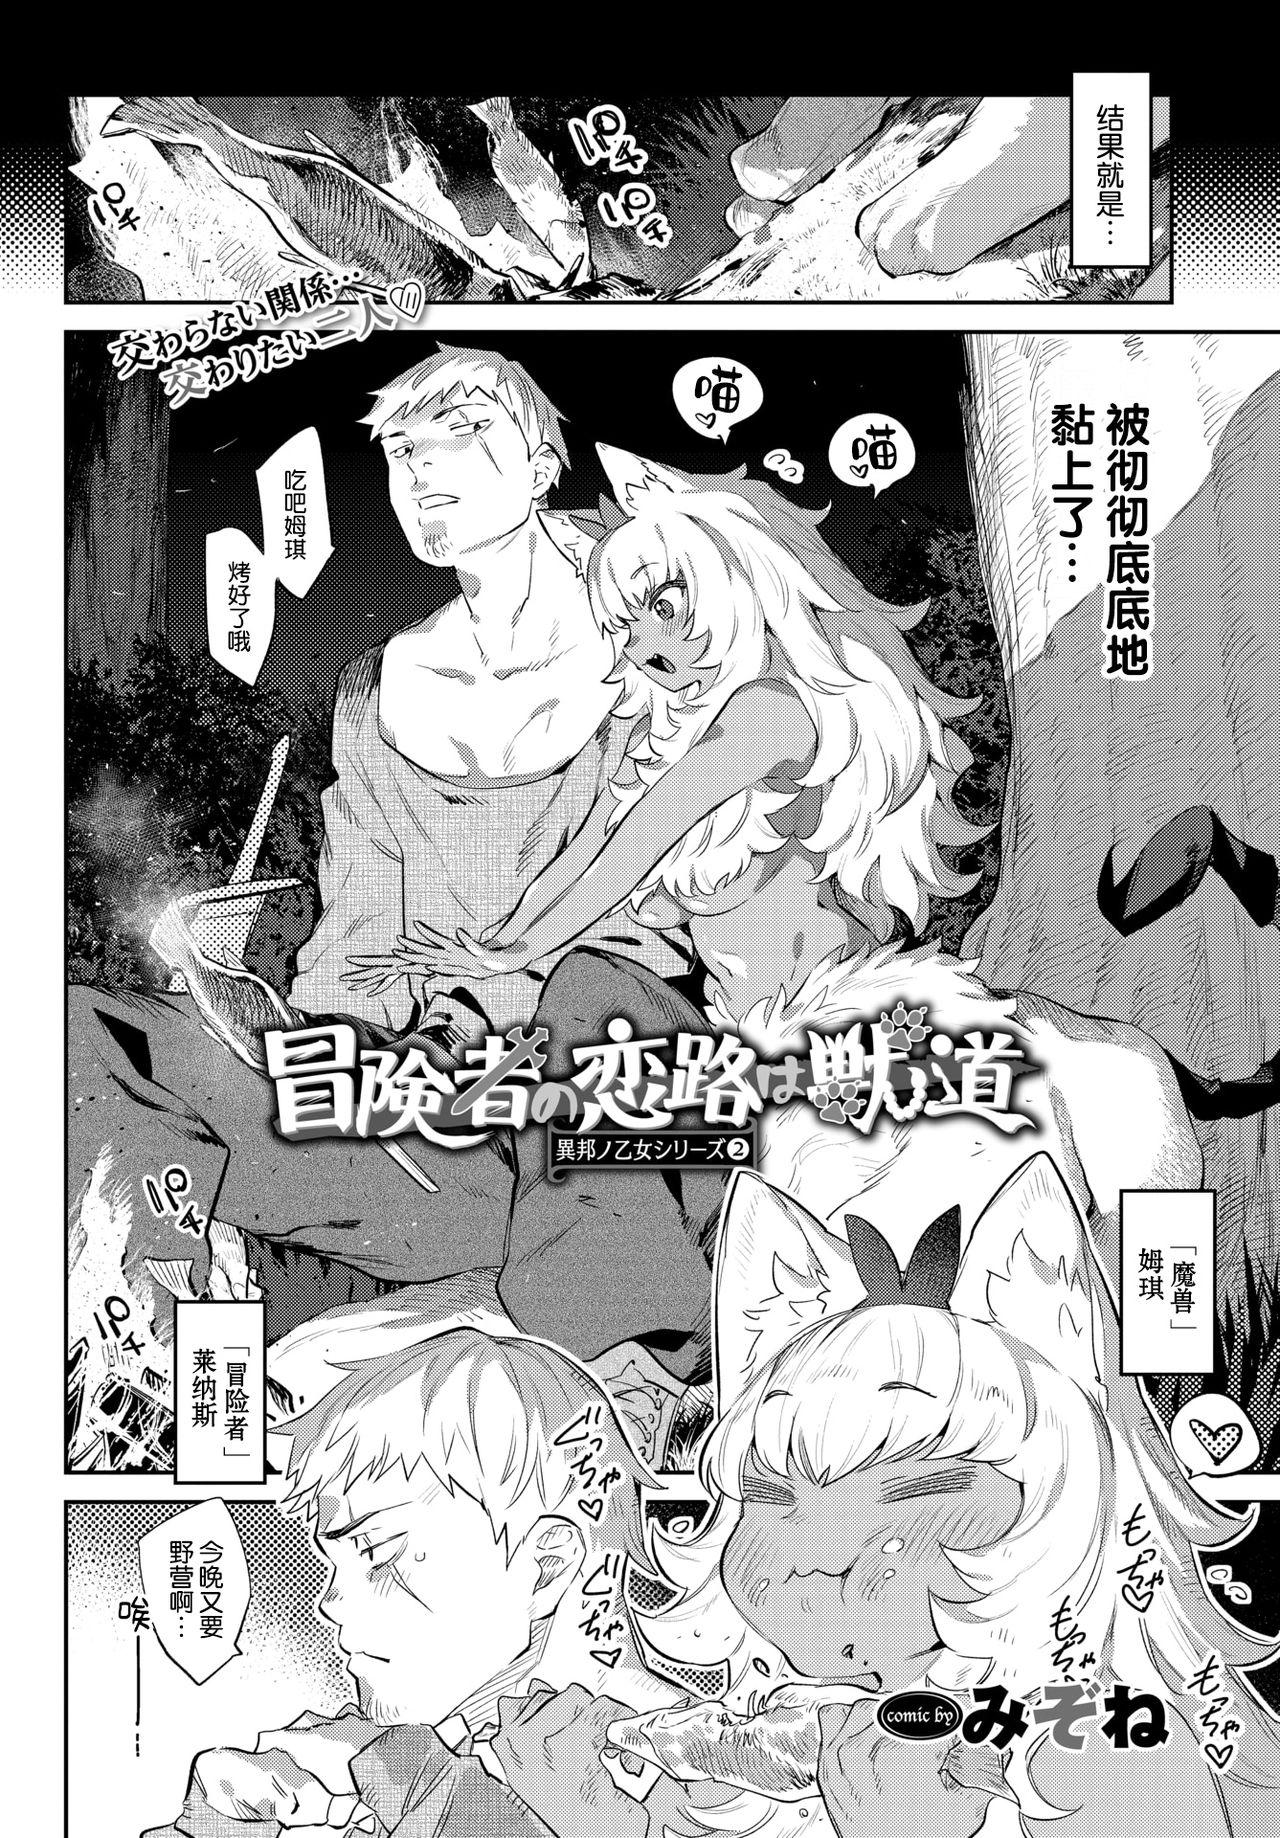 Ihou no Otome - Monster Girls in Another World 35